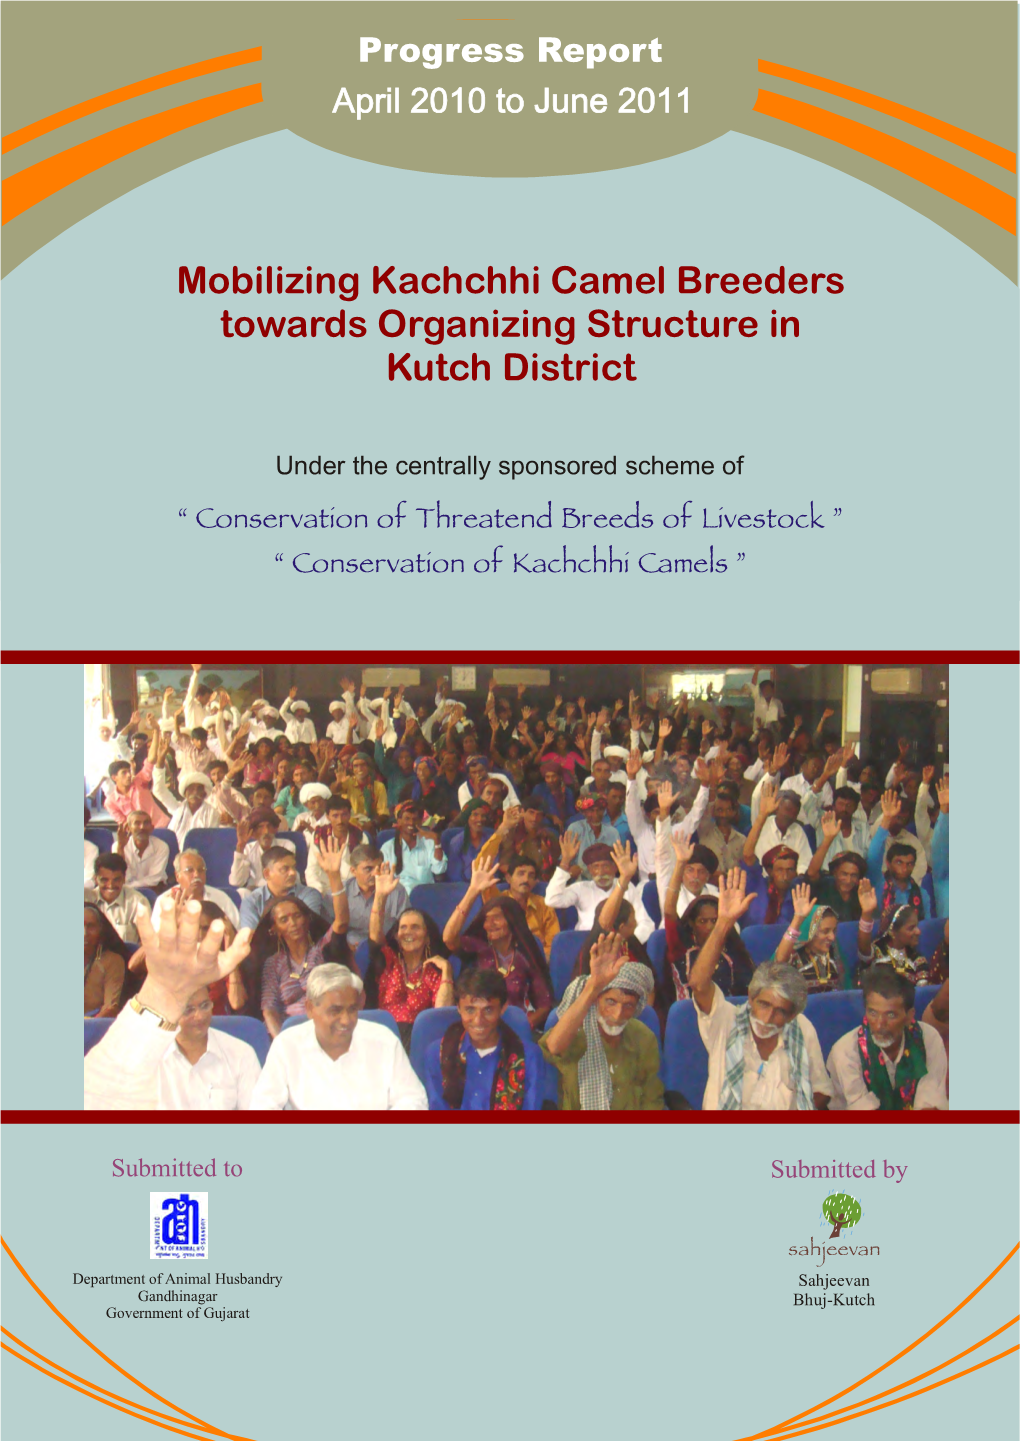 Mobilizing Kachchhi Camel Breeders Towards Organizing Structure in Kutch District